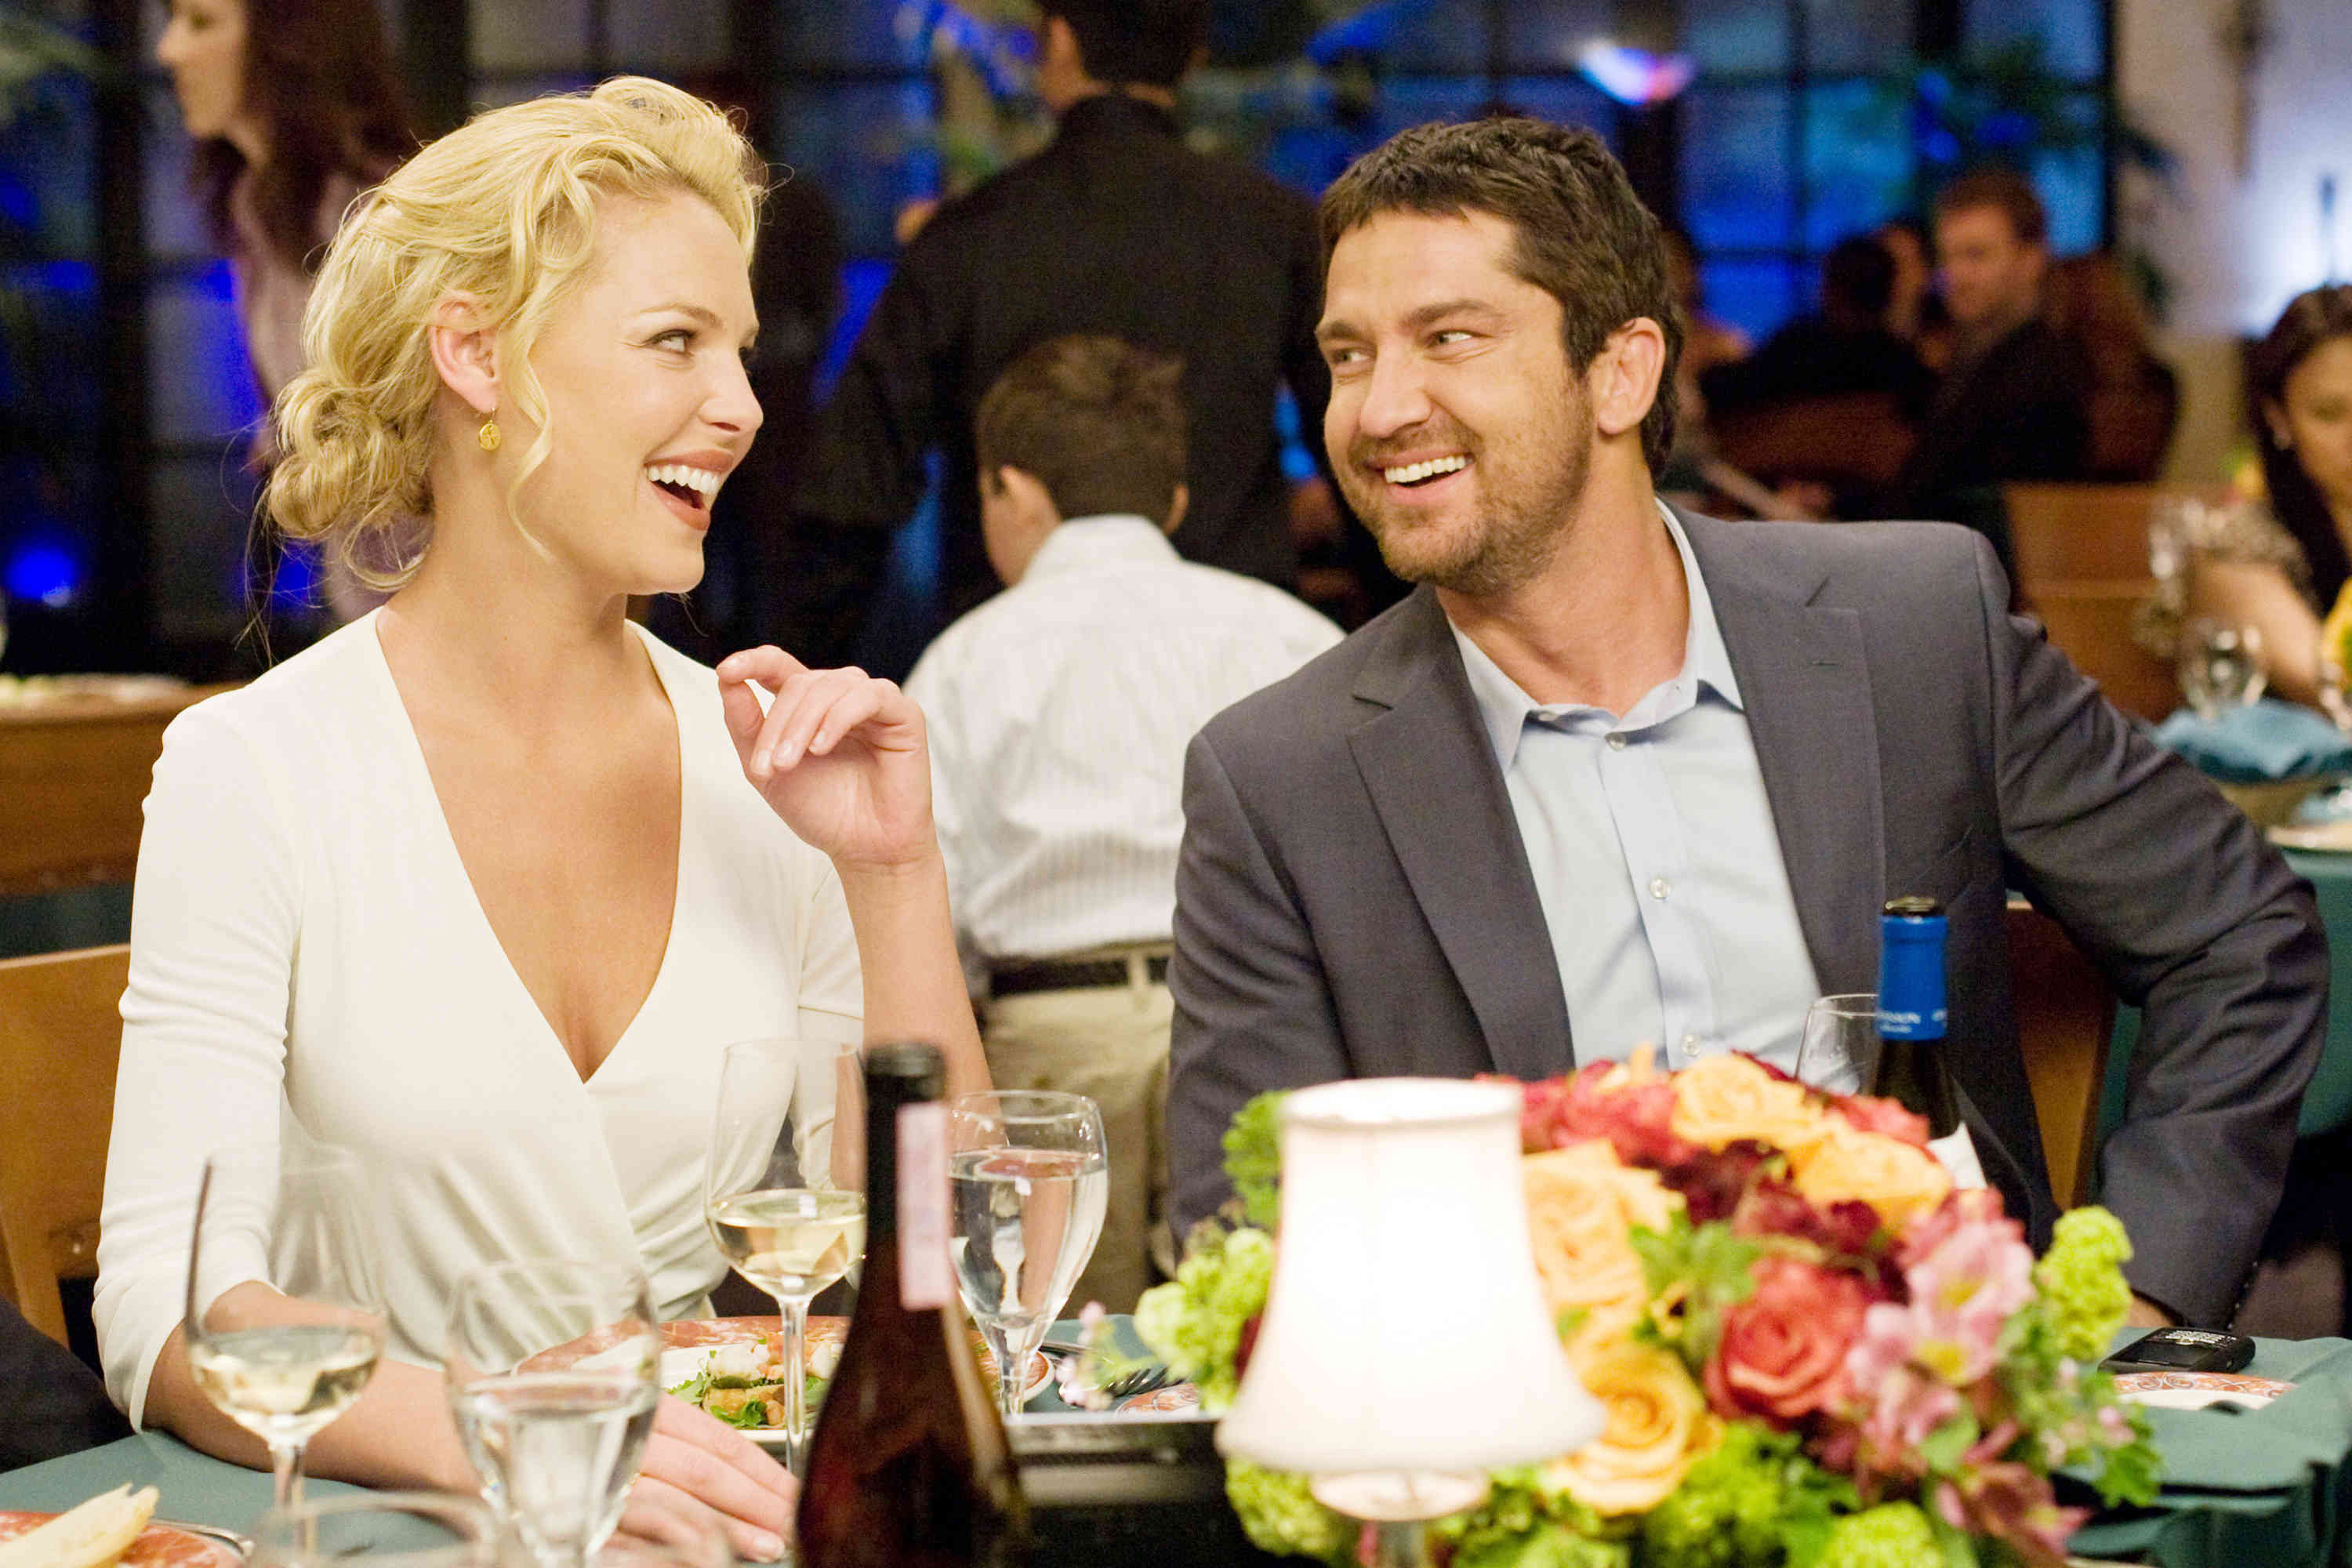 Katherine Heigl stars as Abby Richter and Gerard Butler stars as Mike Alexander in Columbia Pictures' The Ugly Truth (2009). Photo credit by Saeed Adyani.